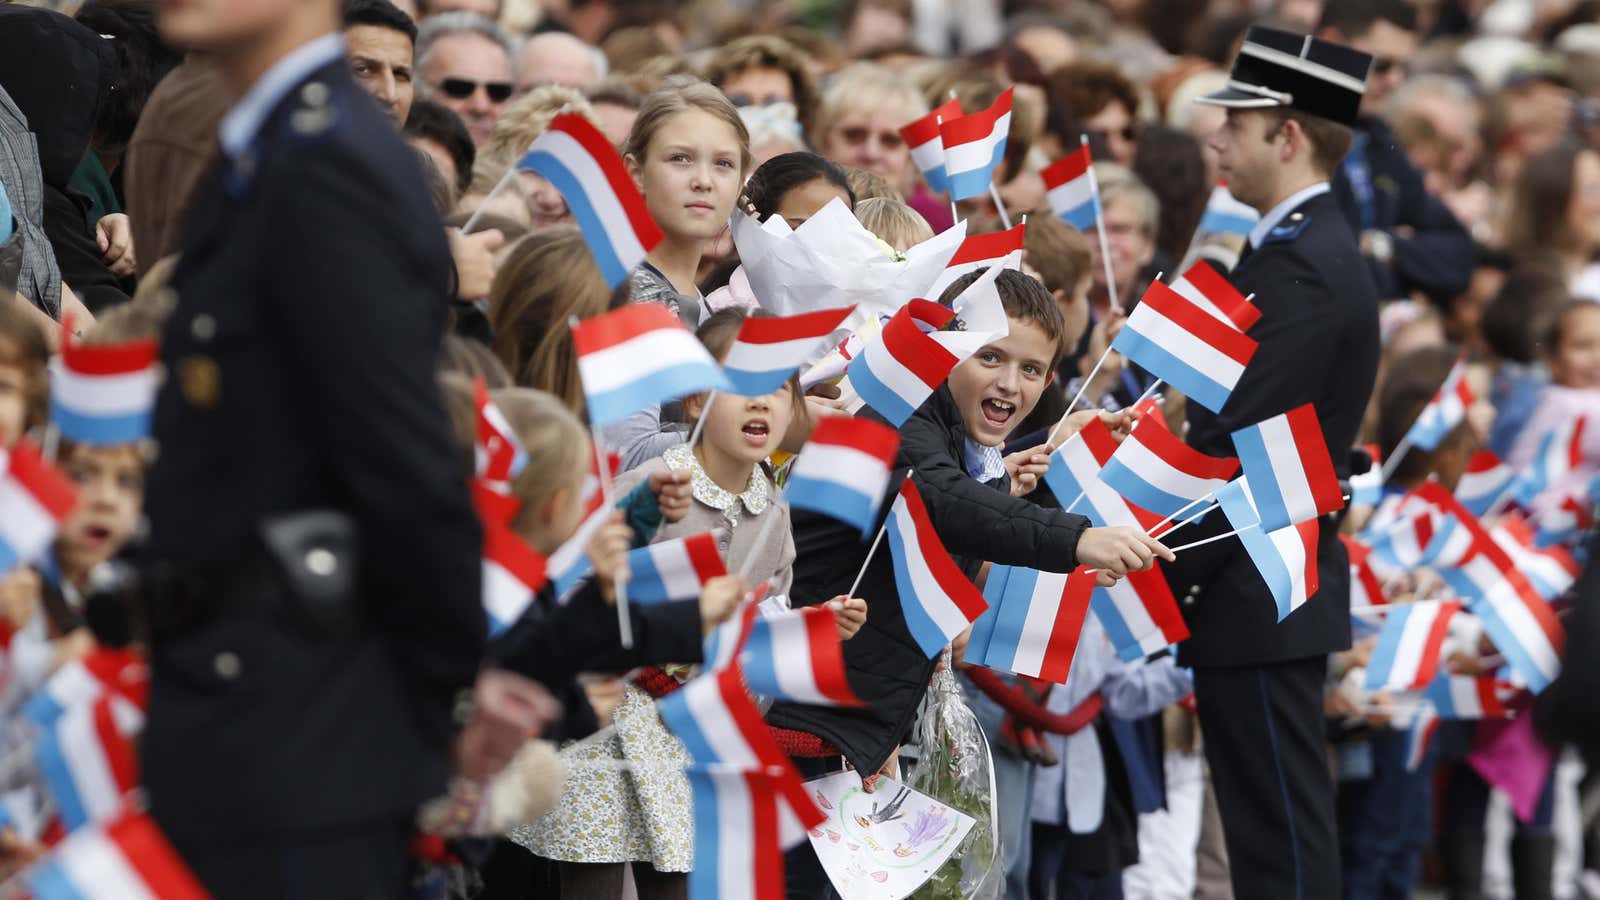 When it comes to generosity, little Luxembourg has plenty to be proud of.